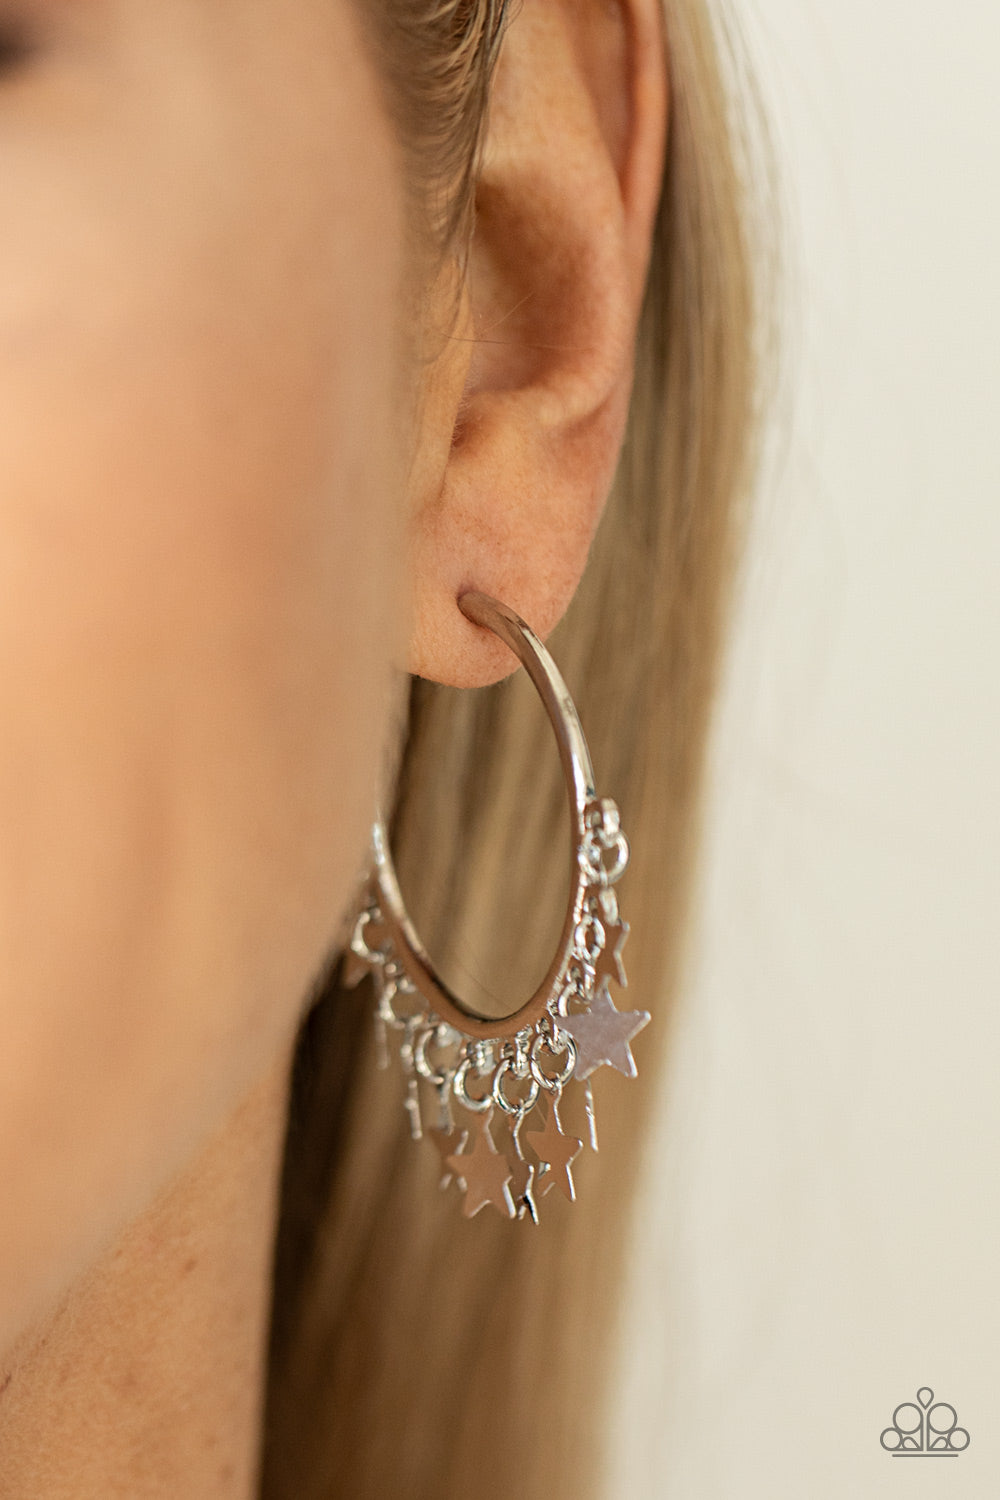 Happy Independence Day - Silver Hoop Earrings - Princess Glam Shop